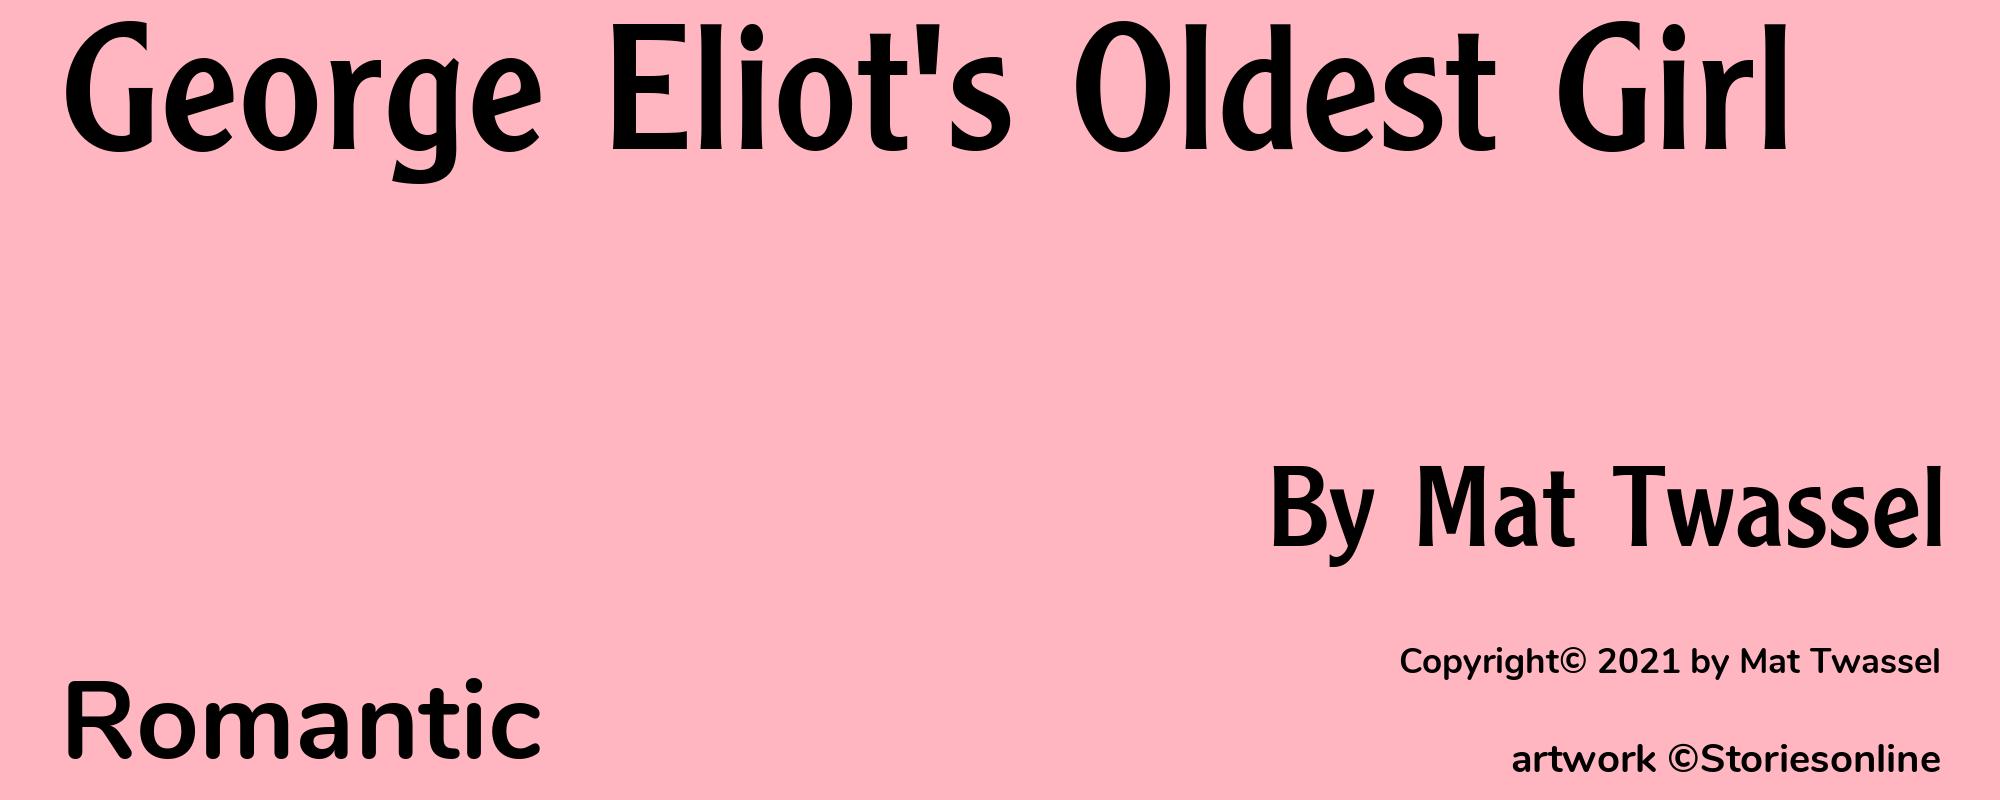 George Eliot's Oldest Girl - Cover